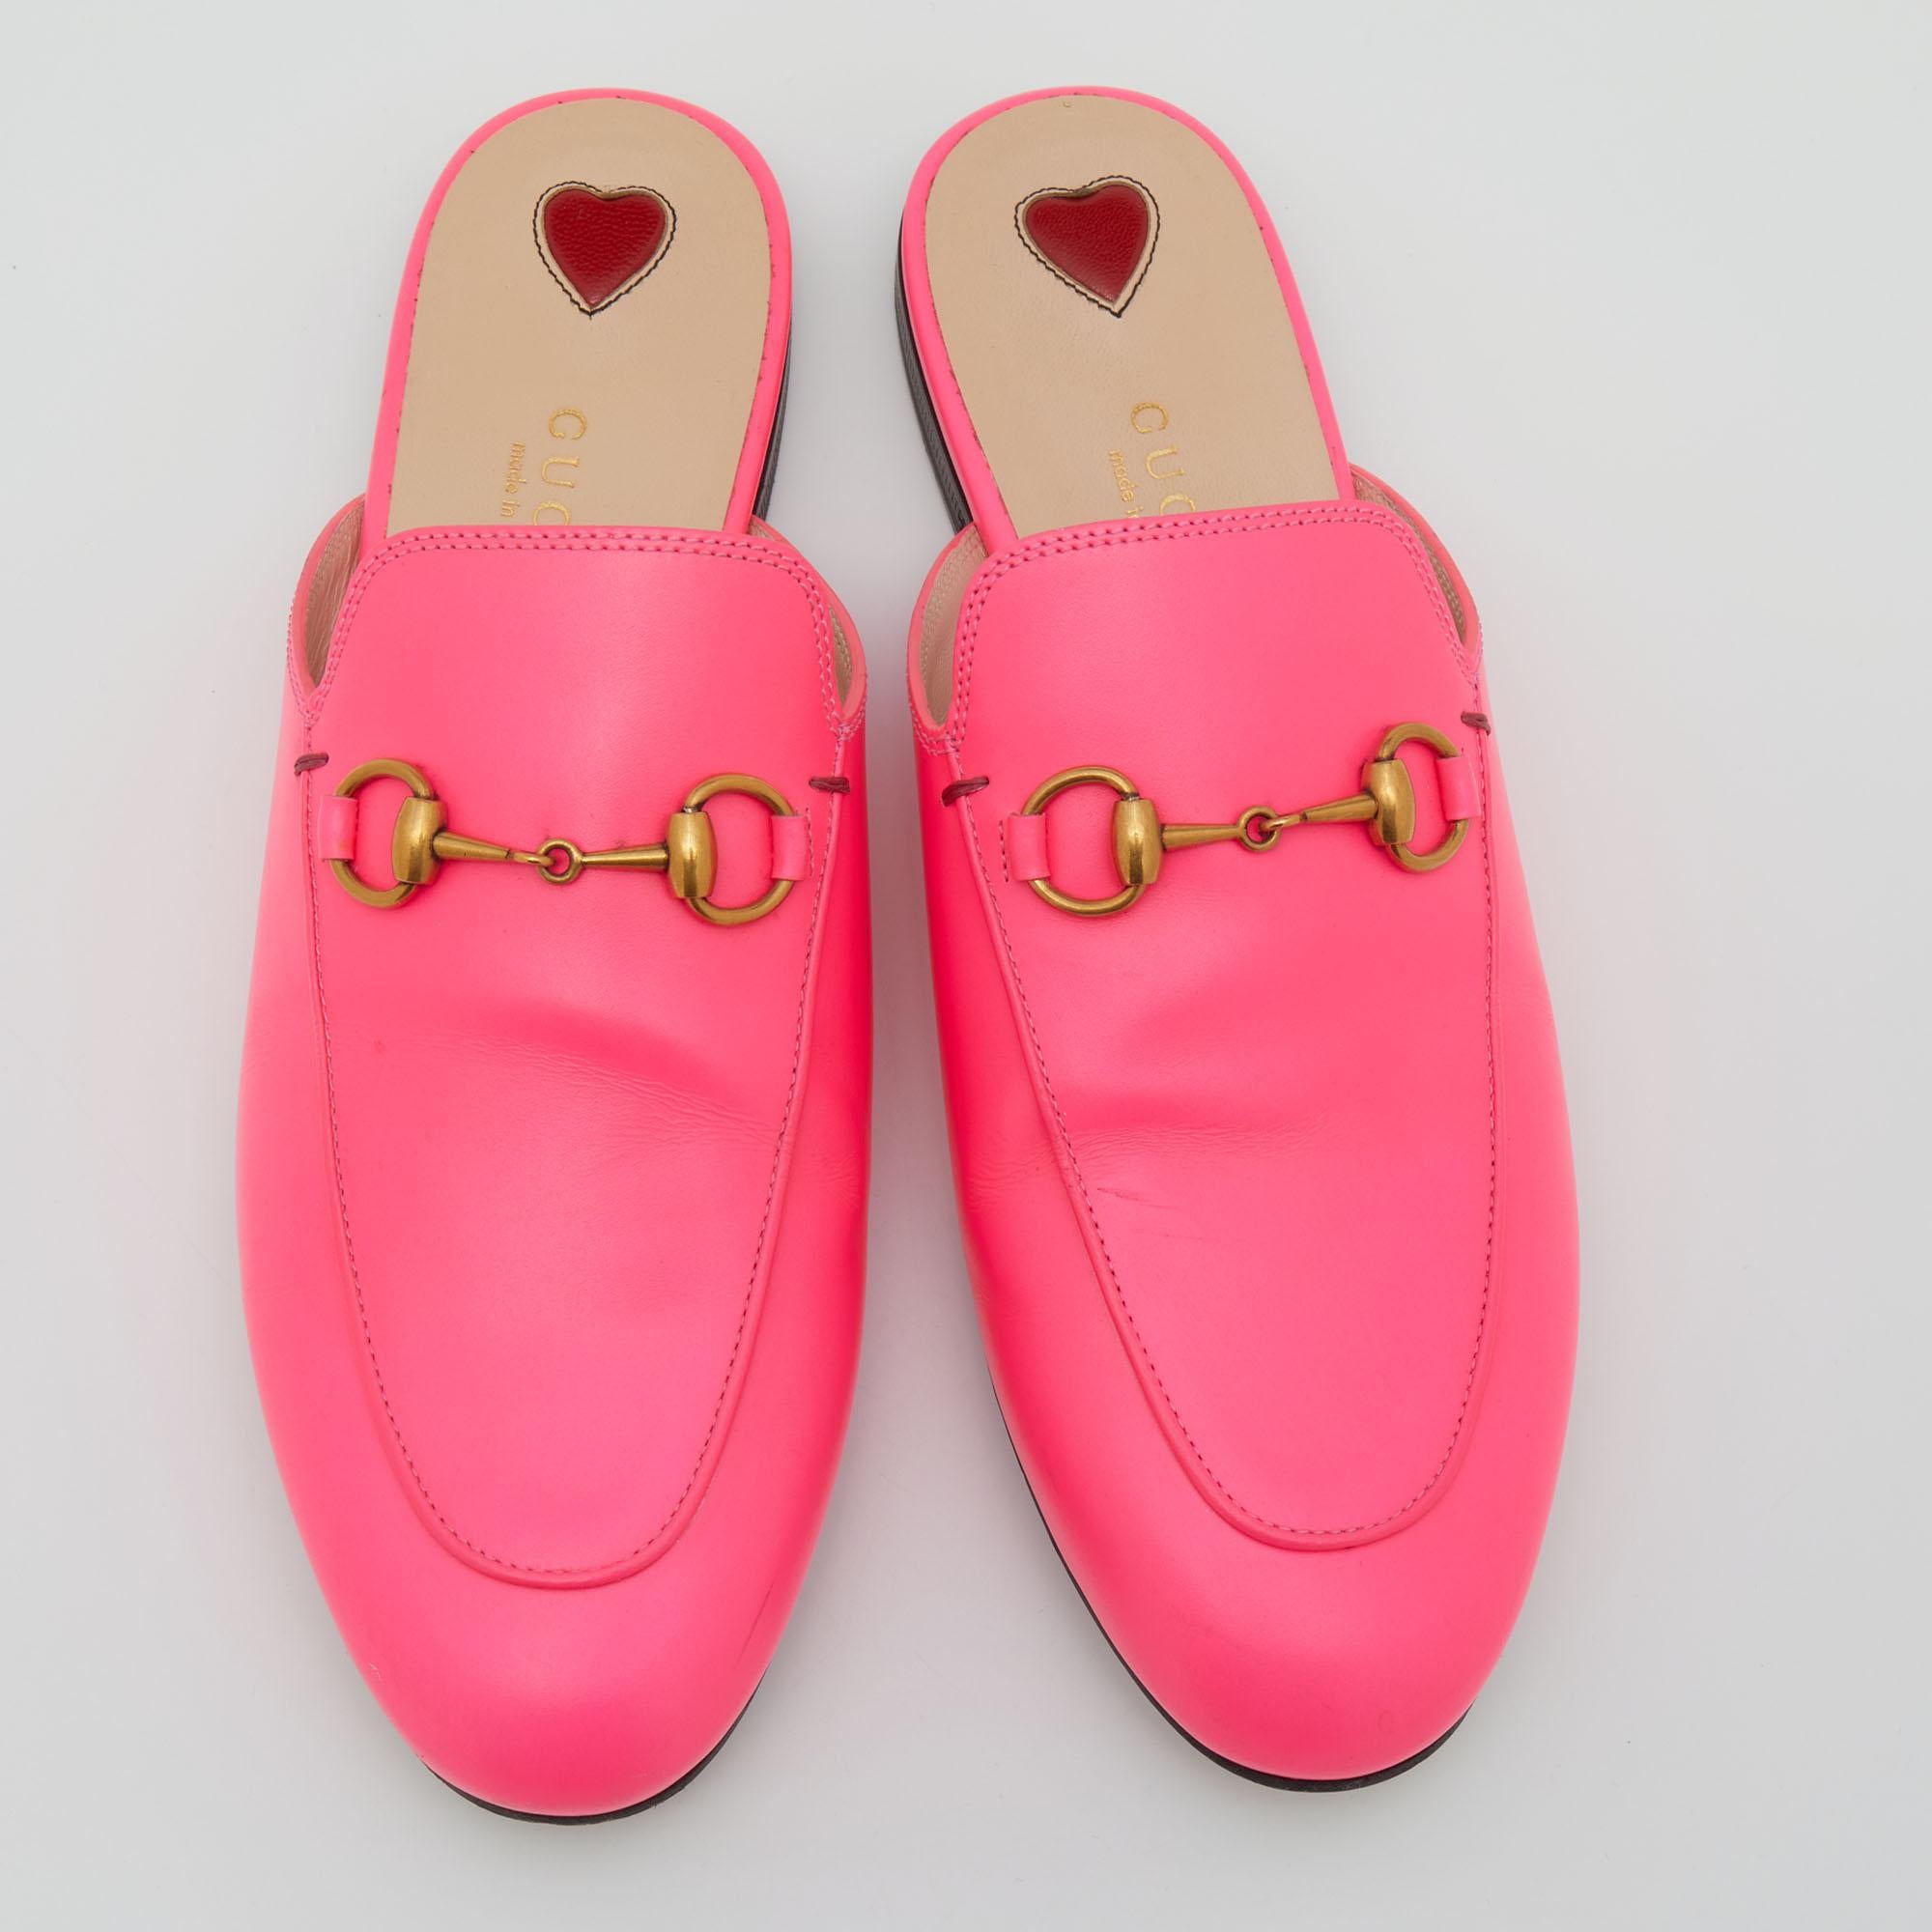 These Gucci Princetown mules are a fresh summer pair. These shoes are enhanced by brass-tone Horsebit details that have defined the brand since the very beginning. Featuring a bright neon pink, leather exterior, they are the epitome of modern